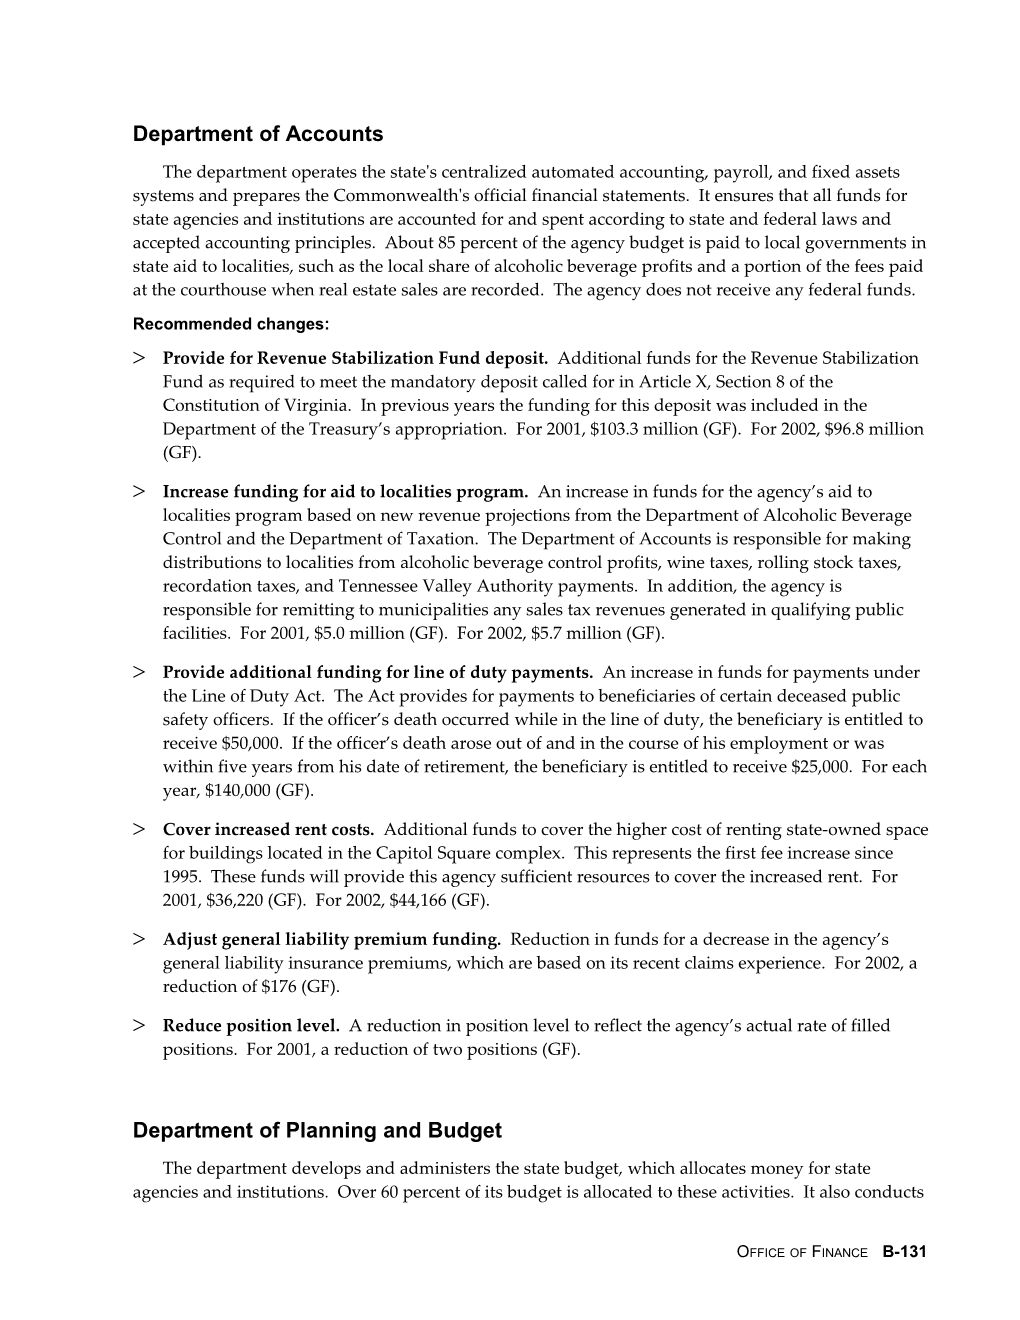 The Governor S Major Recommendations for the 2000-02 Budget in the Finance Area Are To